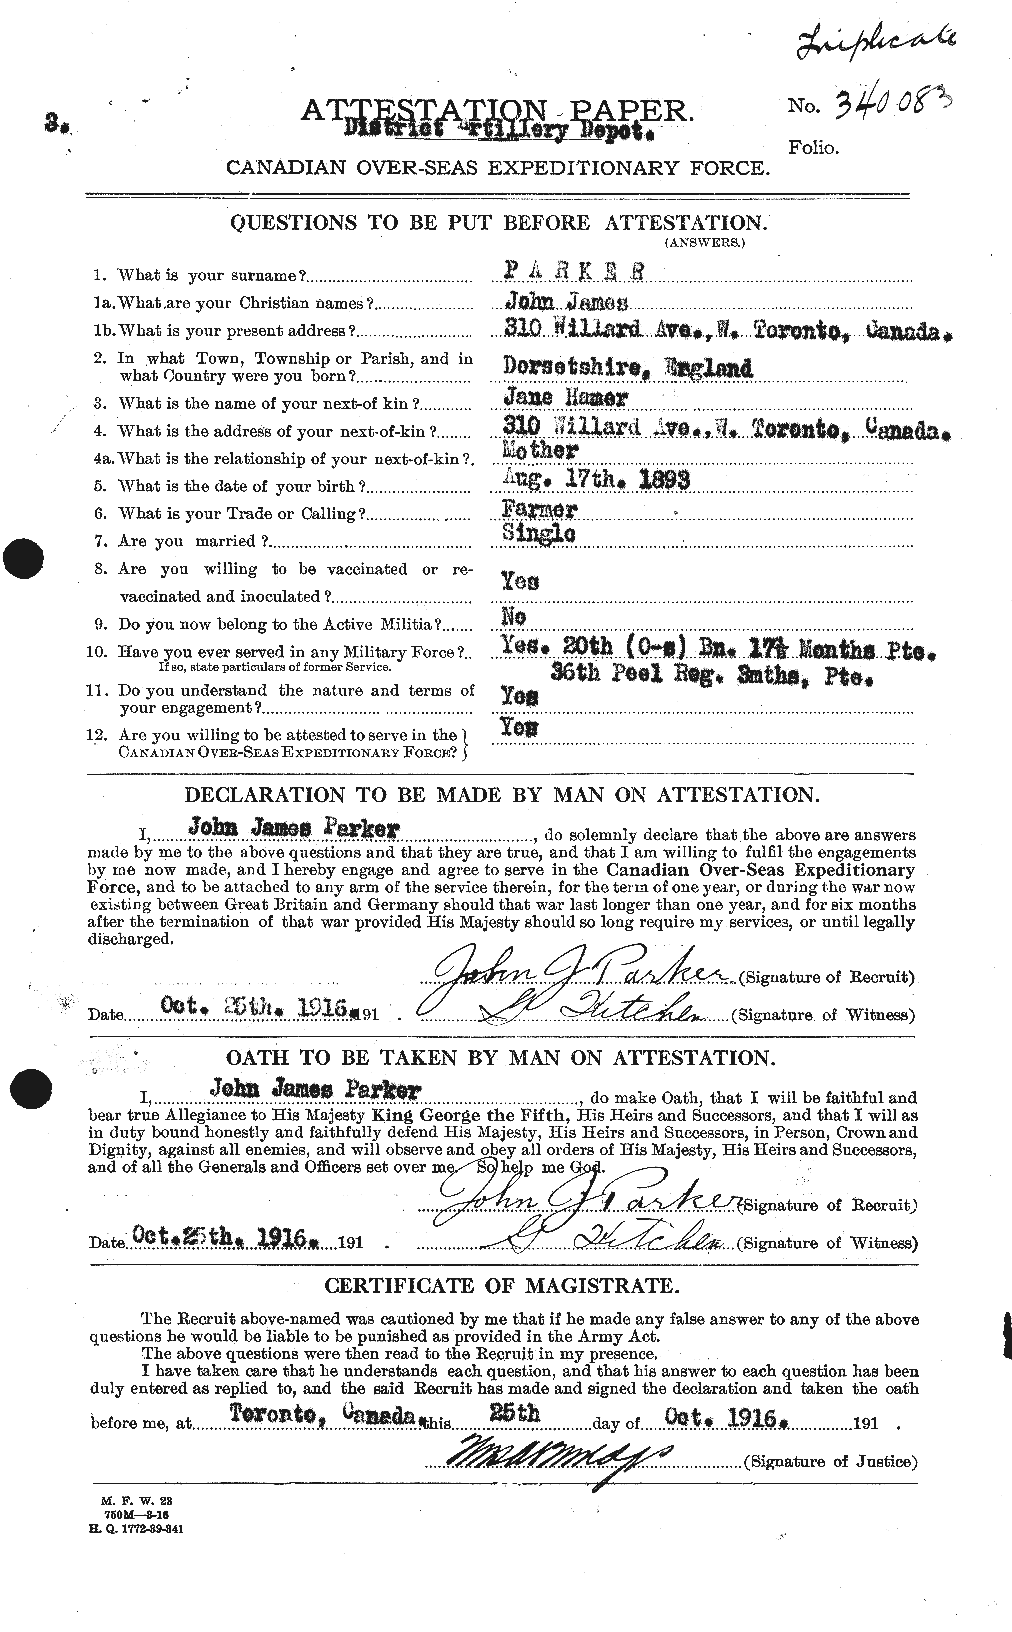 Personnel Records of the First World War - CEF 565479a